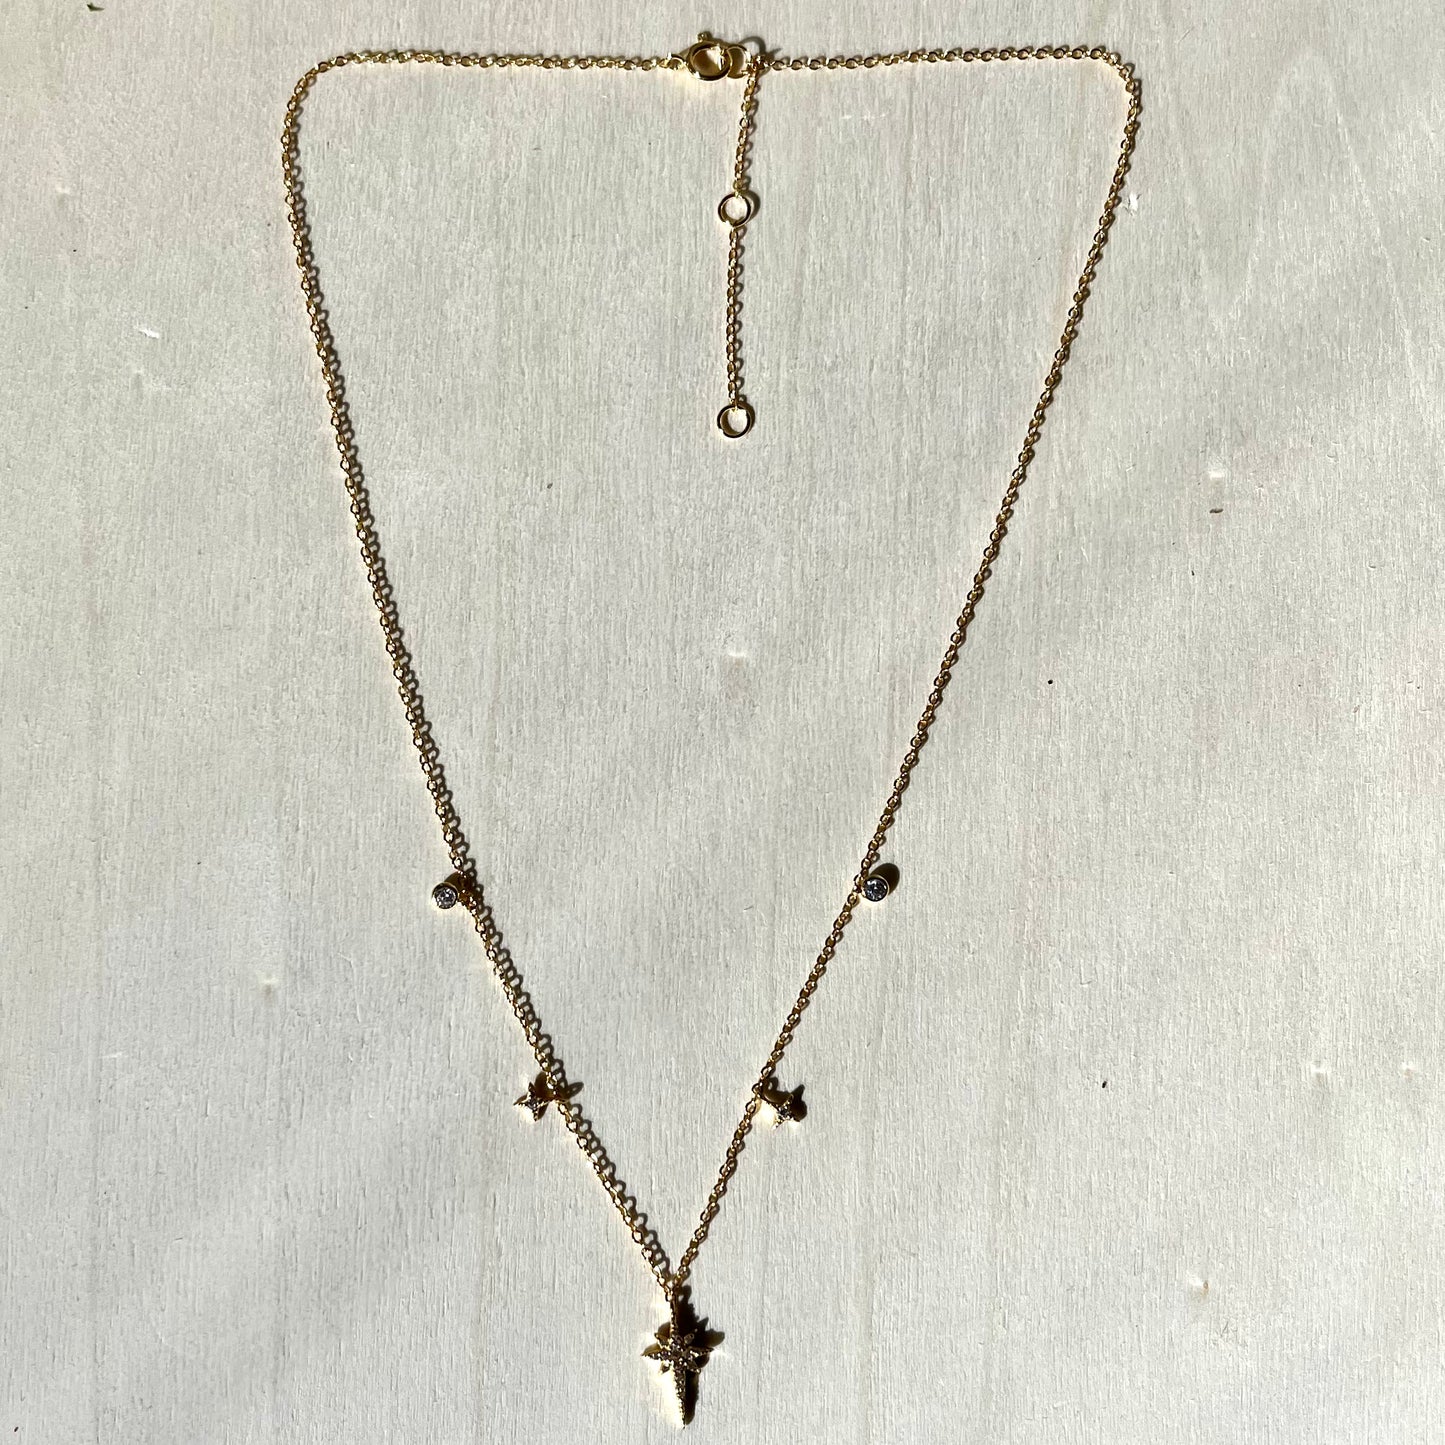 'North Star' Necklace